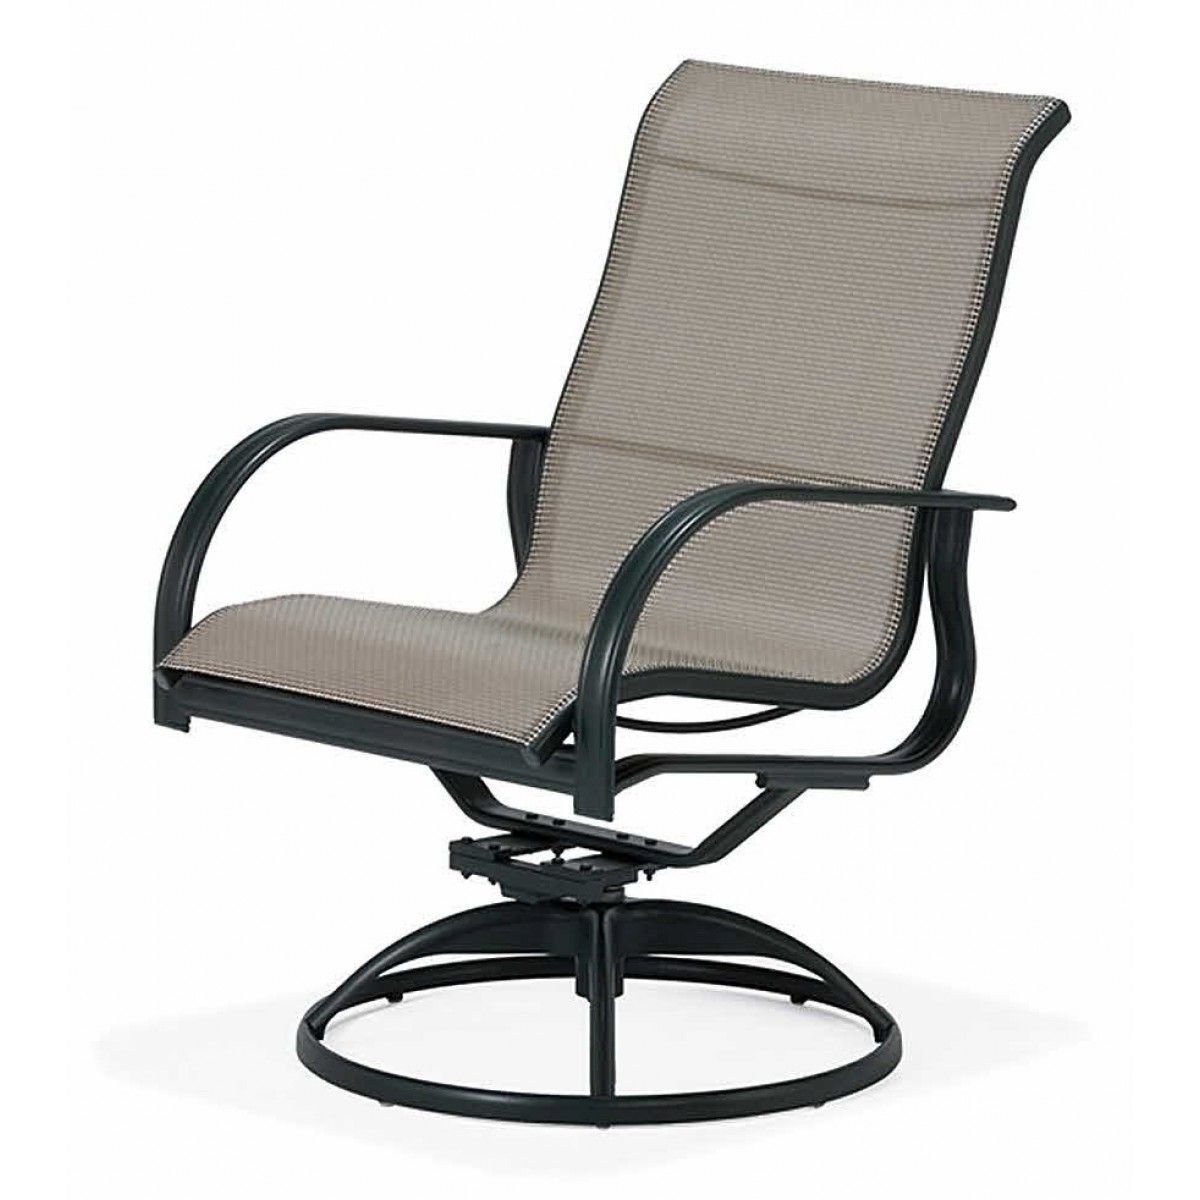 Newest Winston Mayfair Collection Sling High Back Swivel Tilt Within Sling High Back Swivel Chairs (View 4 of 30)